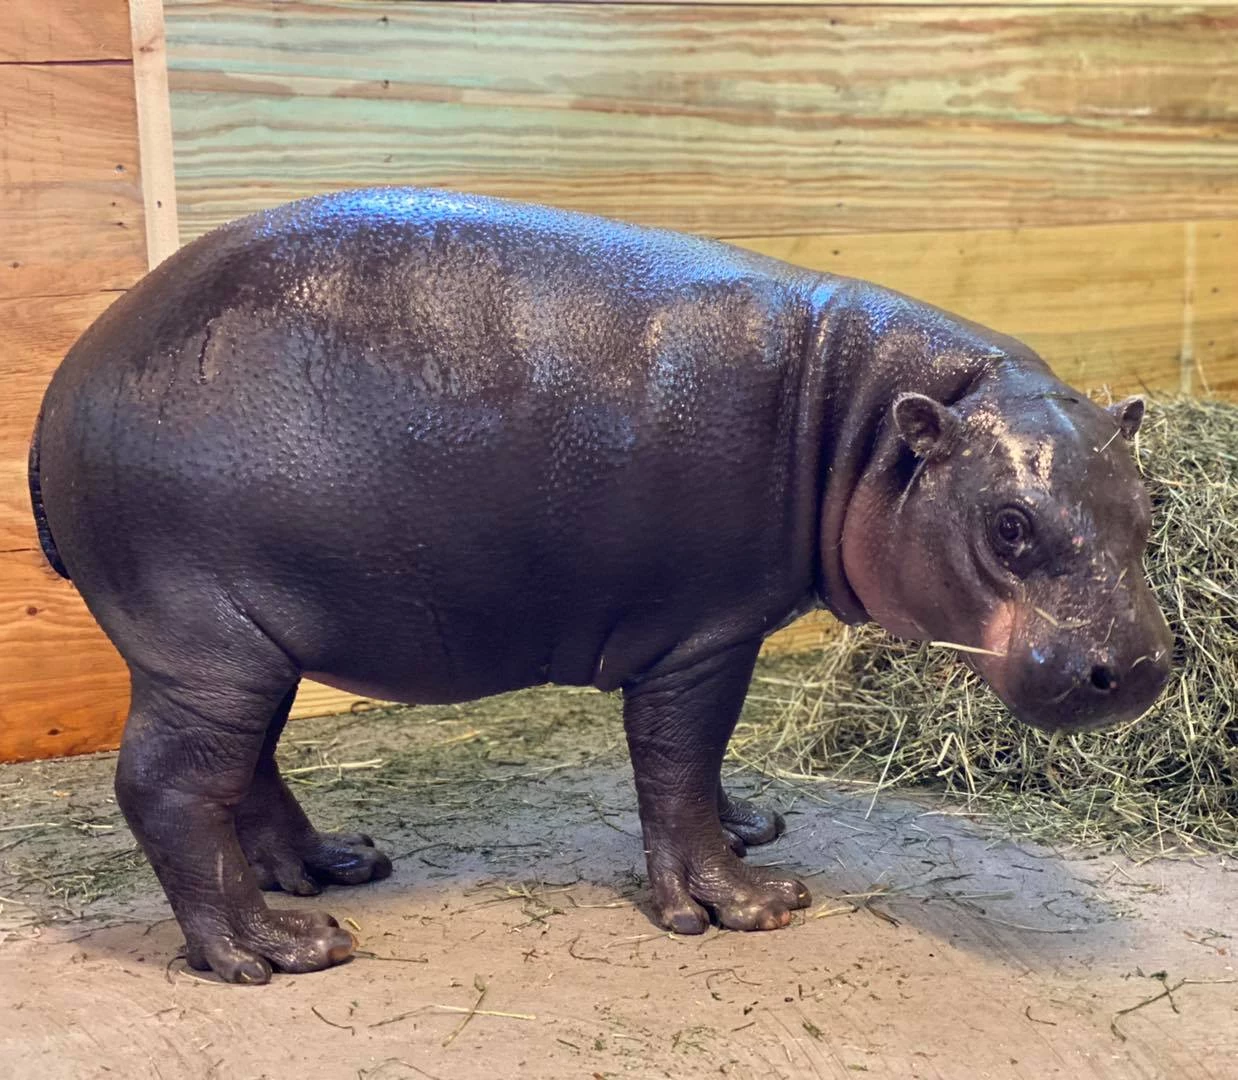 Get Up Close & Personal With a Pygmy Hippo in CNY